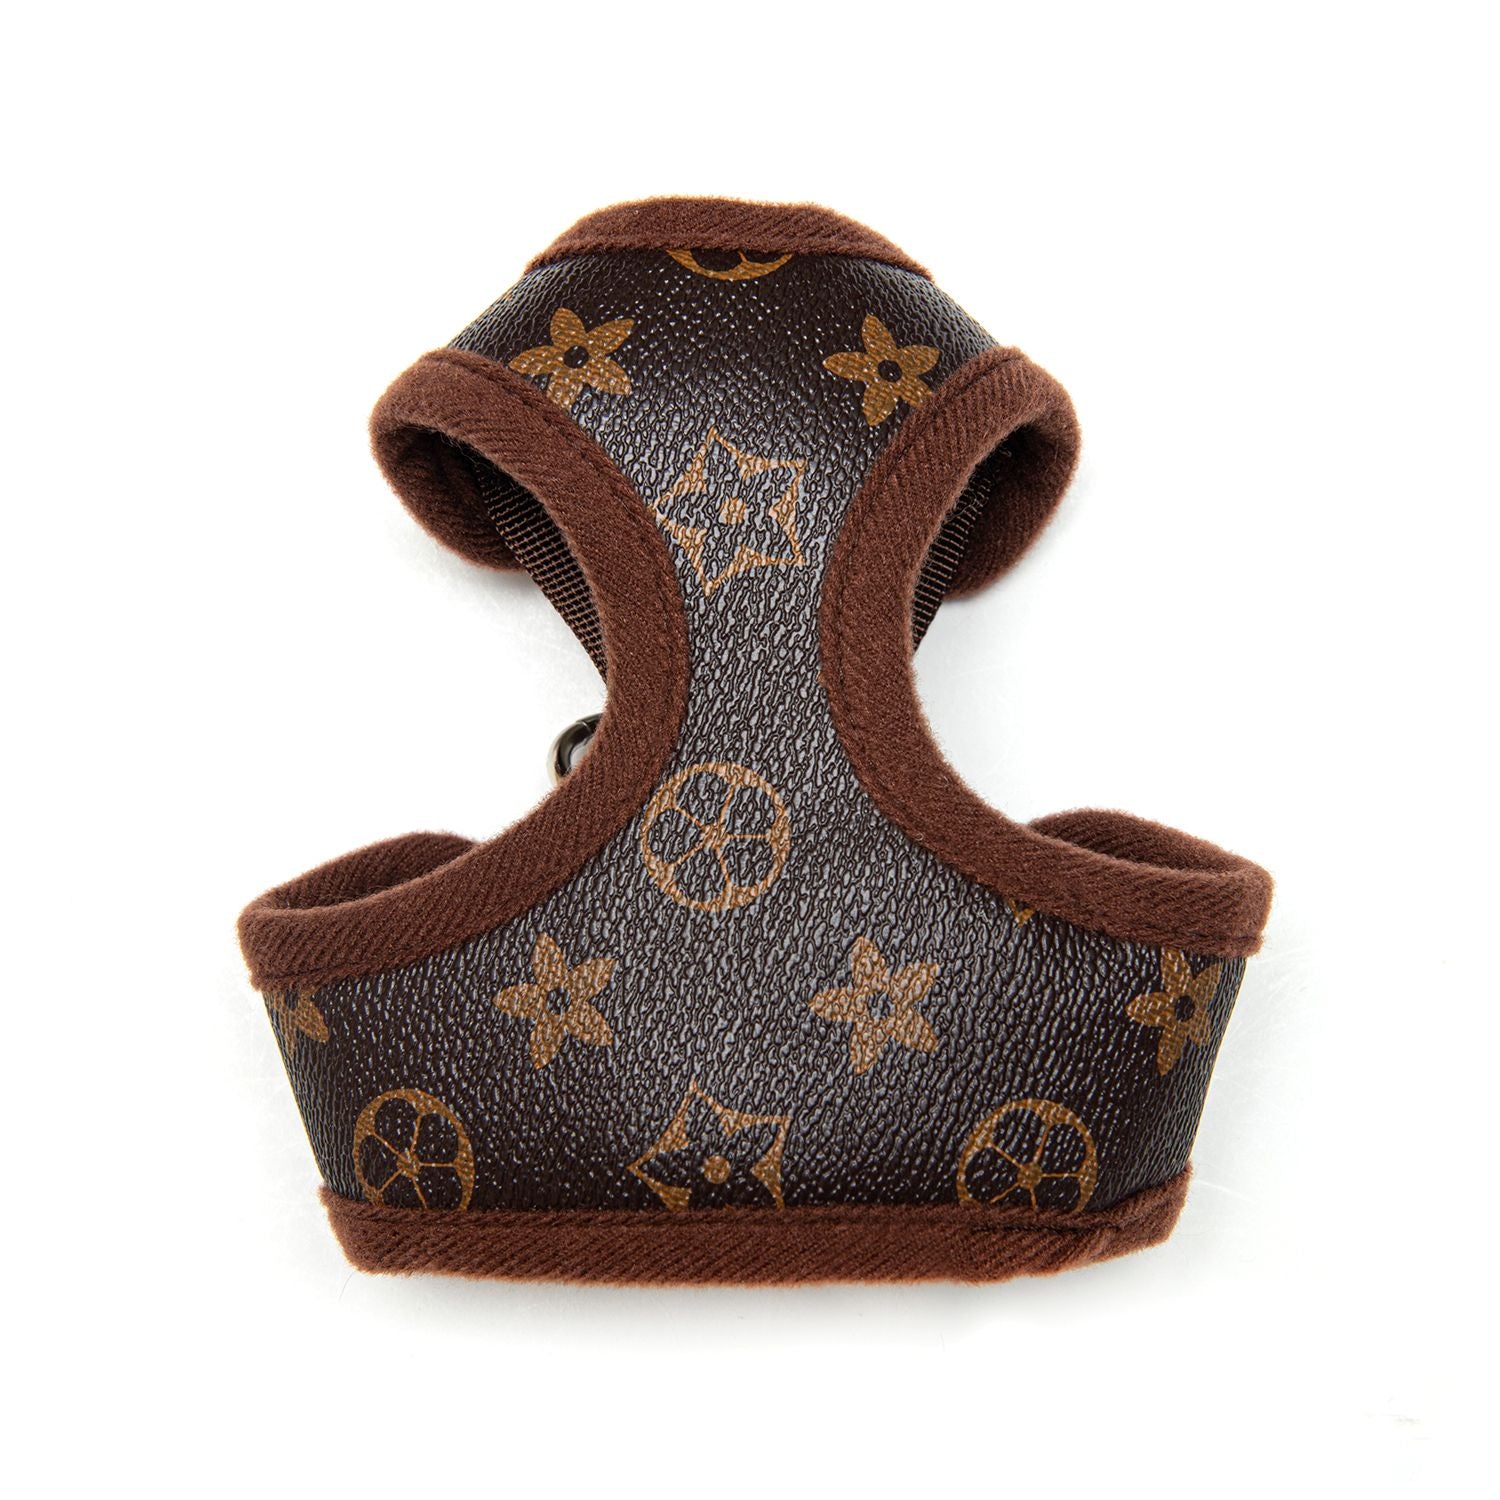 Louis Pawtton Monogram Dog Harness with Free Matching Leash! - All